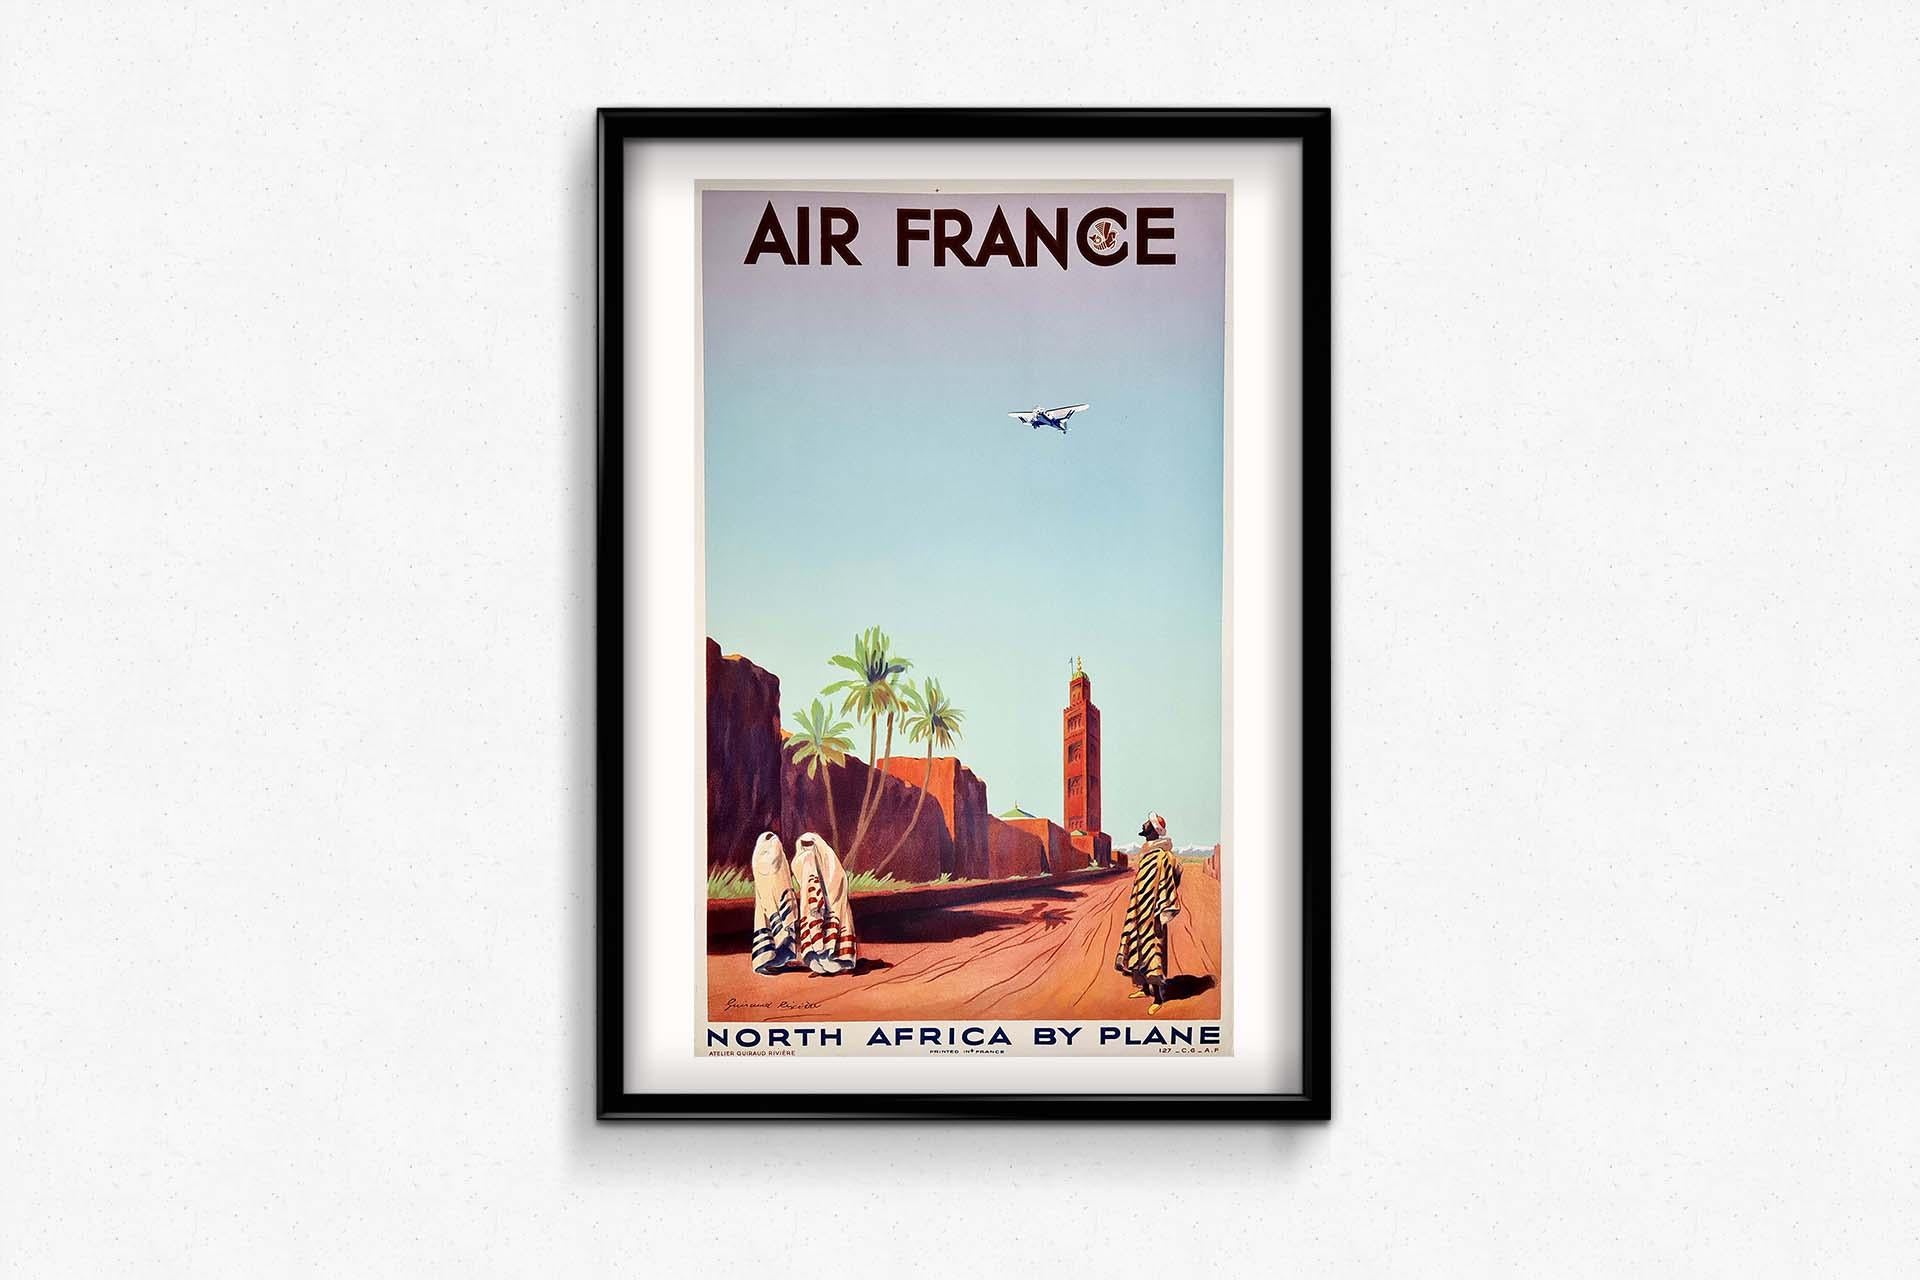 Poster of Air France finely printed in lithography on stone in 1934, representing a plane Breguet 393 T sedan.

It represents the city of Marrakech and the air links between France and North Africa including Morocco. The designer represents here the